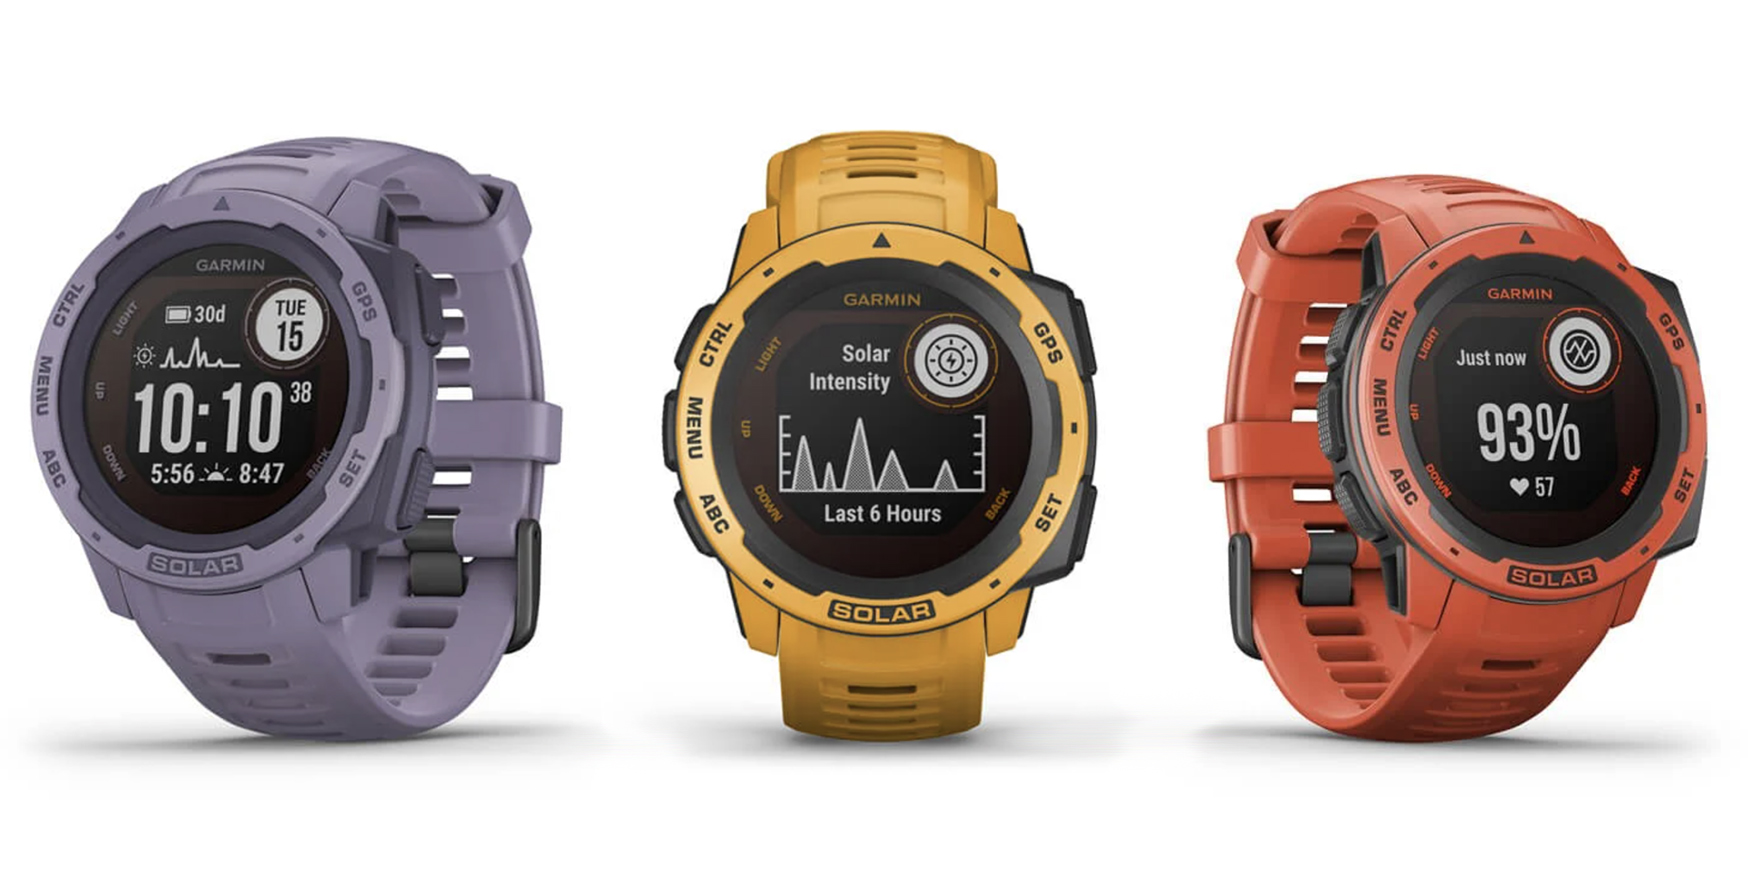 The Garmin Solar instinct is a great choice for womens hunting gifts.